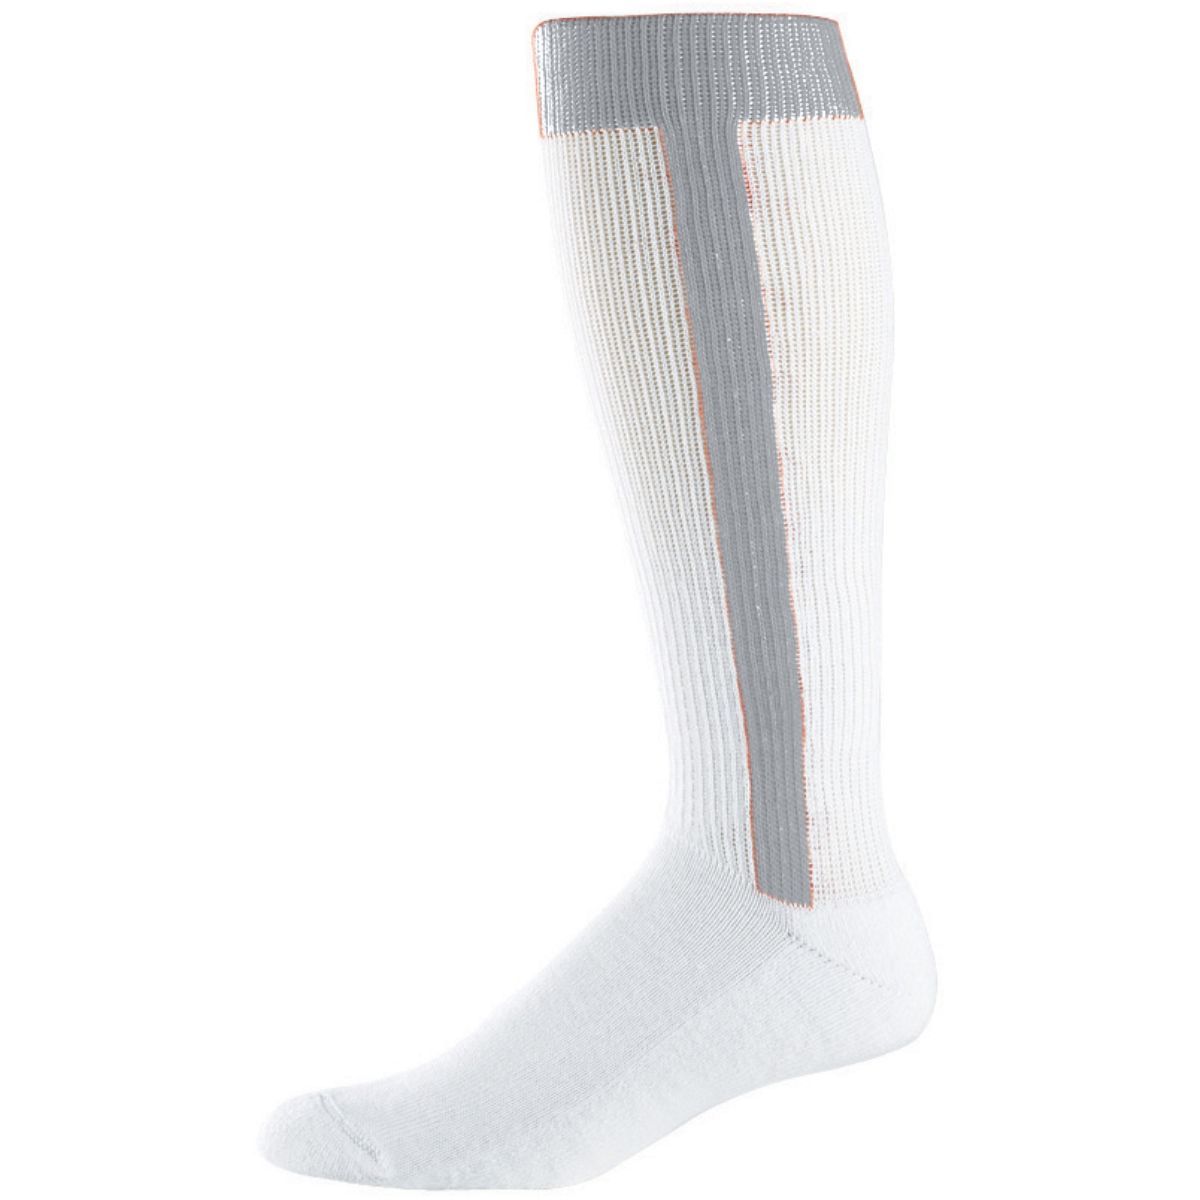 Augusta Sportswear Baseball Stirrup Sock in Silver Grey  -Part of the Accessories, Augusta-Products, Accessories-Socks, Baseball, All-Sports, All-Sports-1 product lines at KanaleyCreations.com